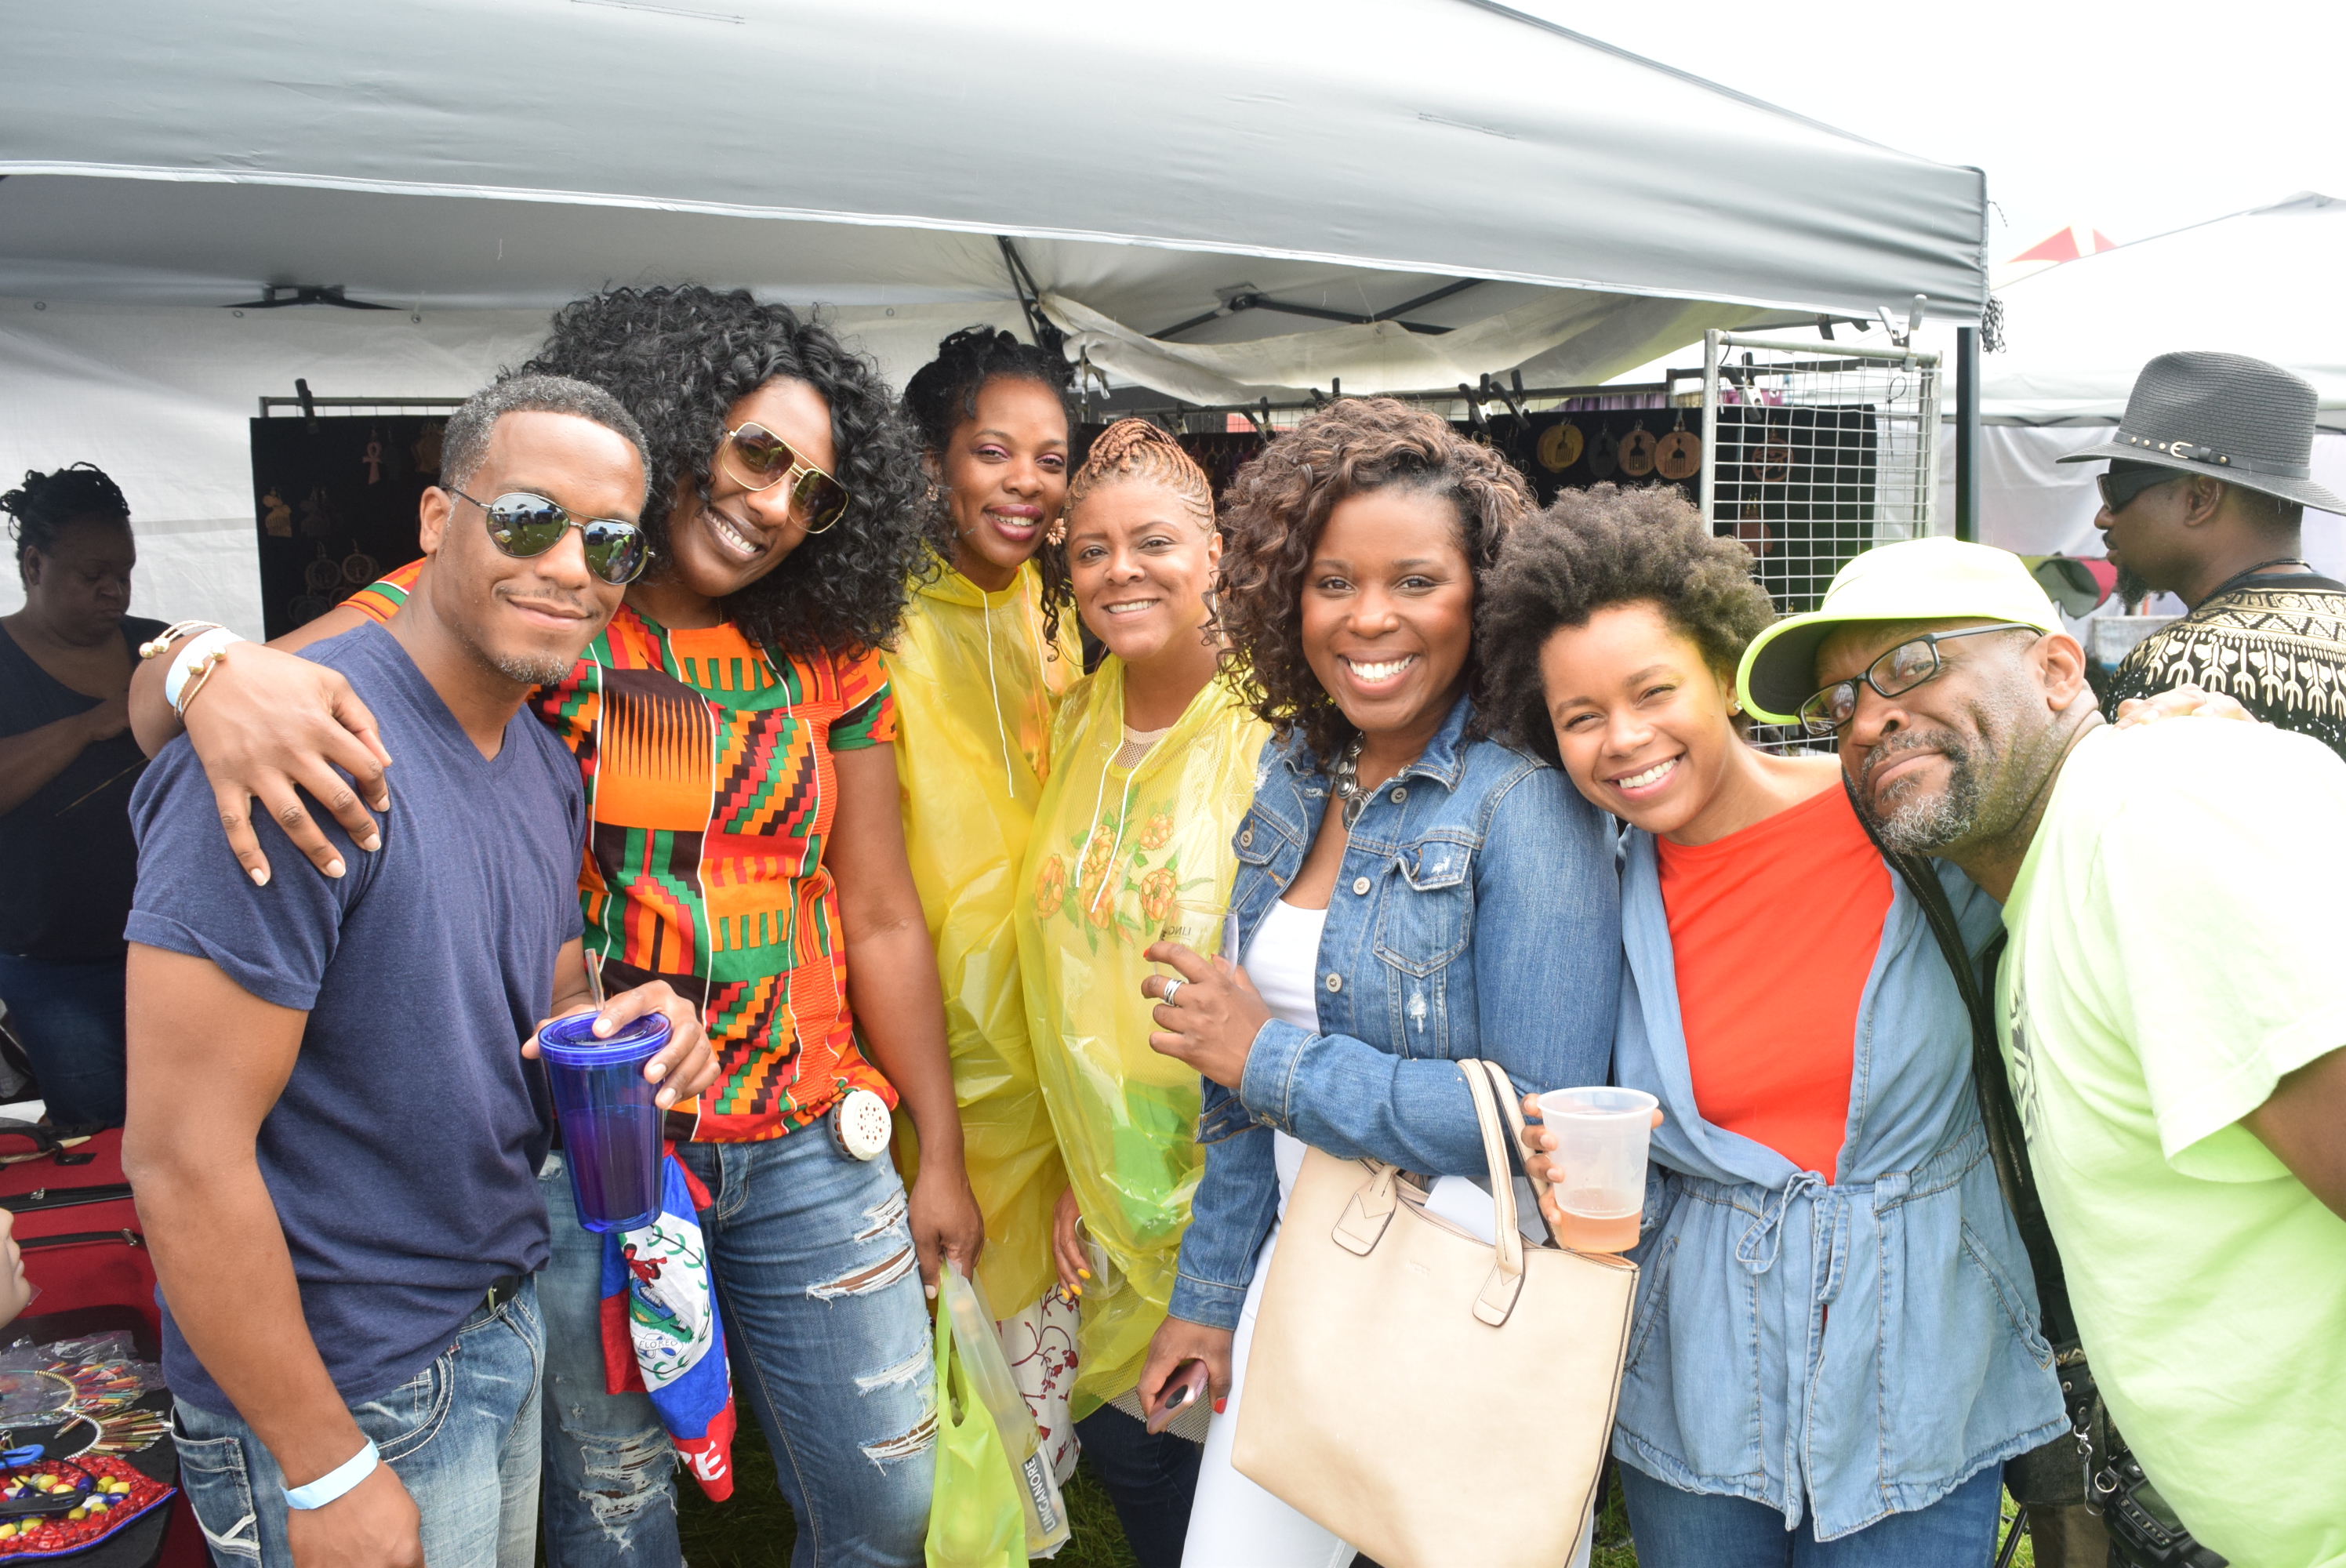 The 2018 Caribbean Wine Festival at Linganore Goombay DC